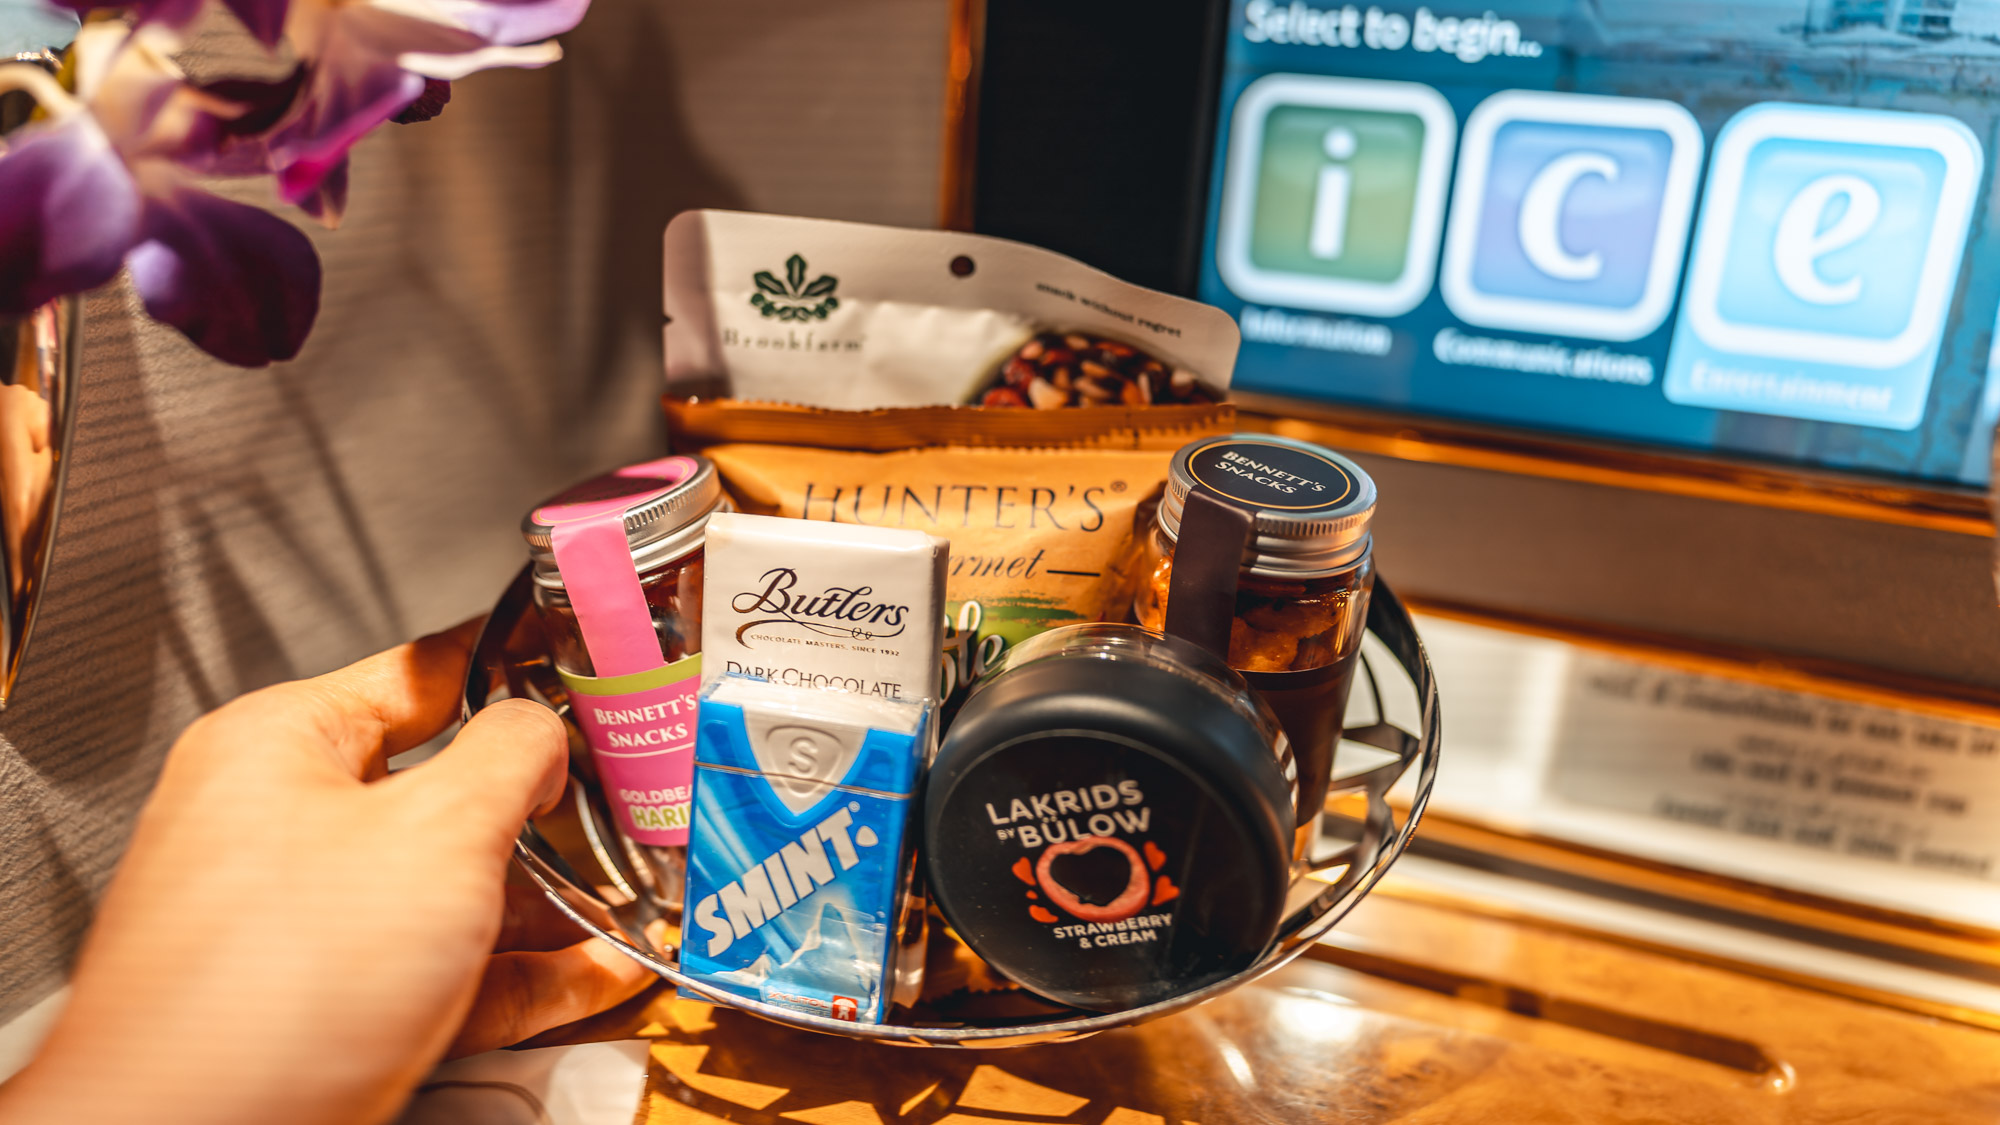 Emirates Boeing 777 First class snacks